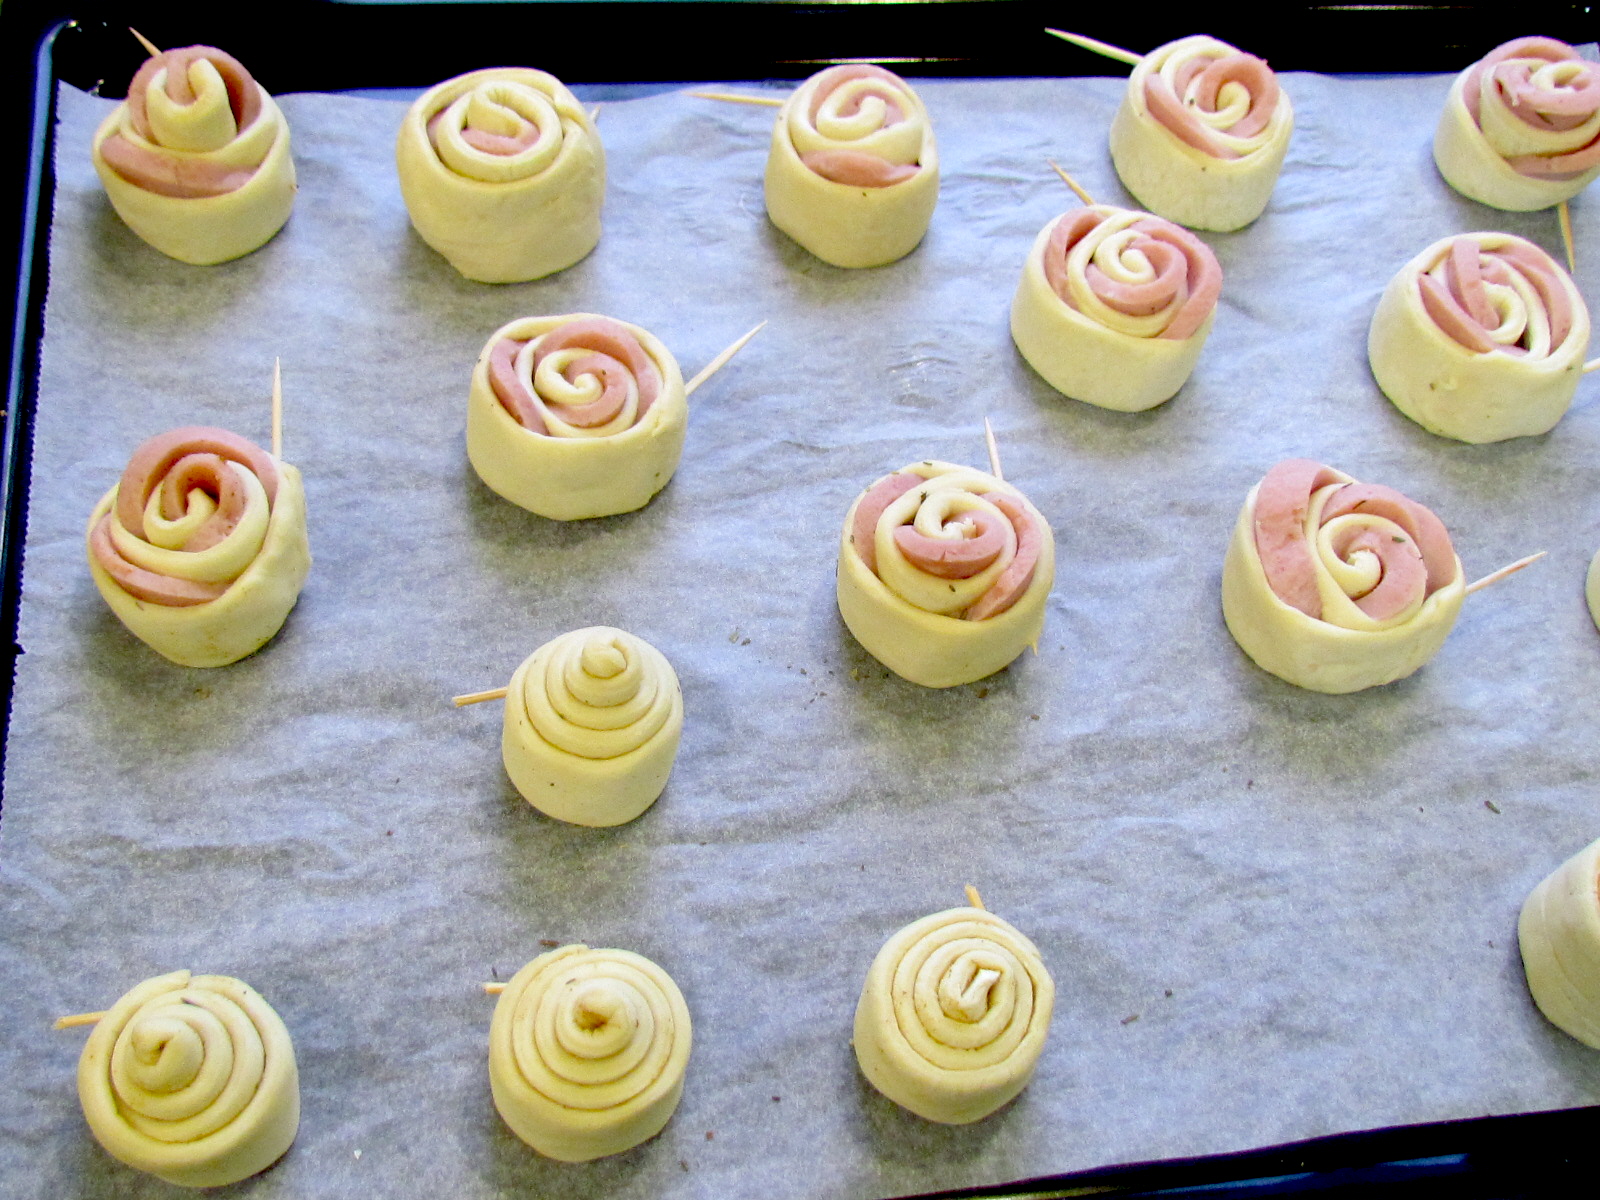 Sausage roses in puff pastry (oven)